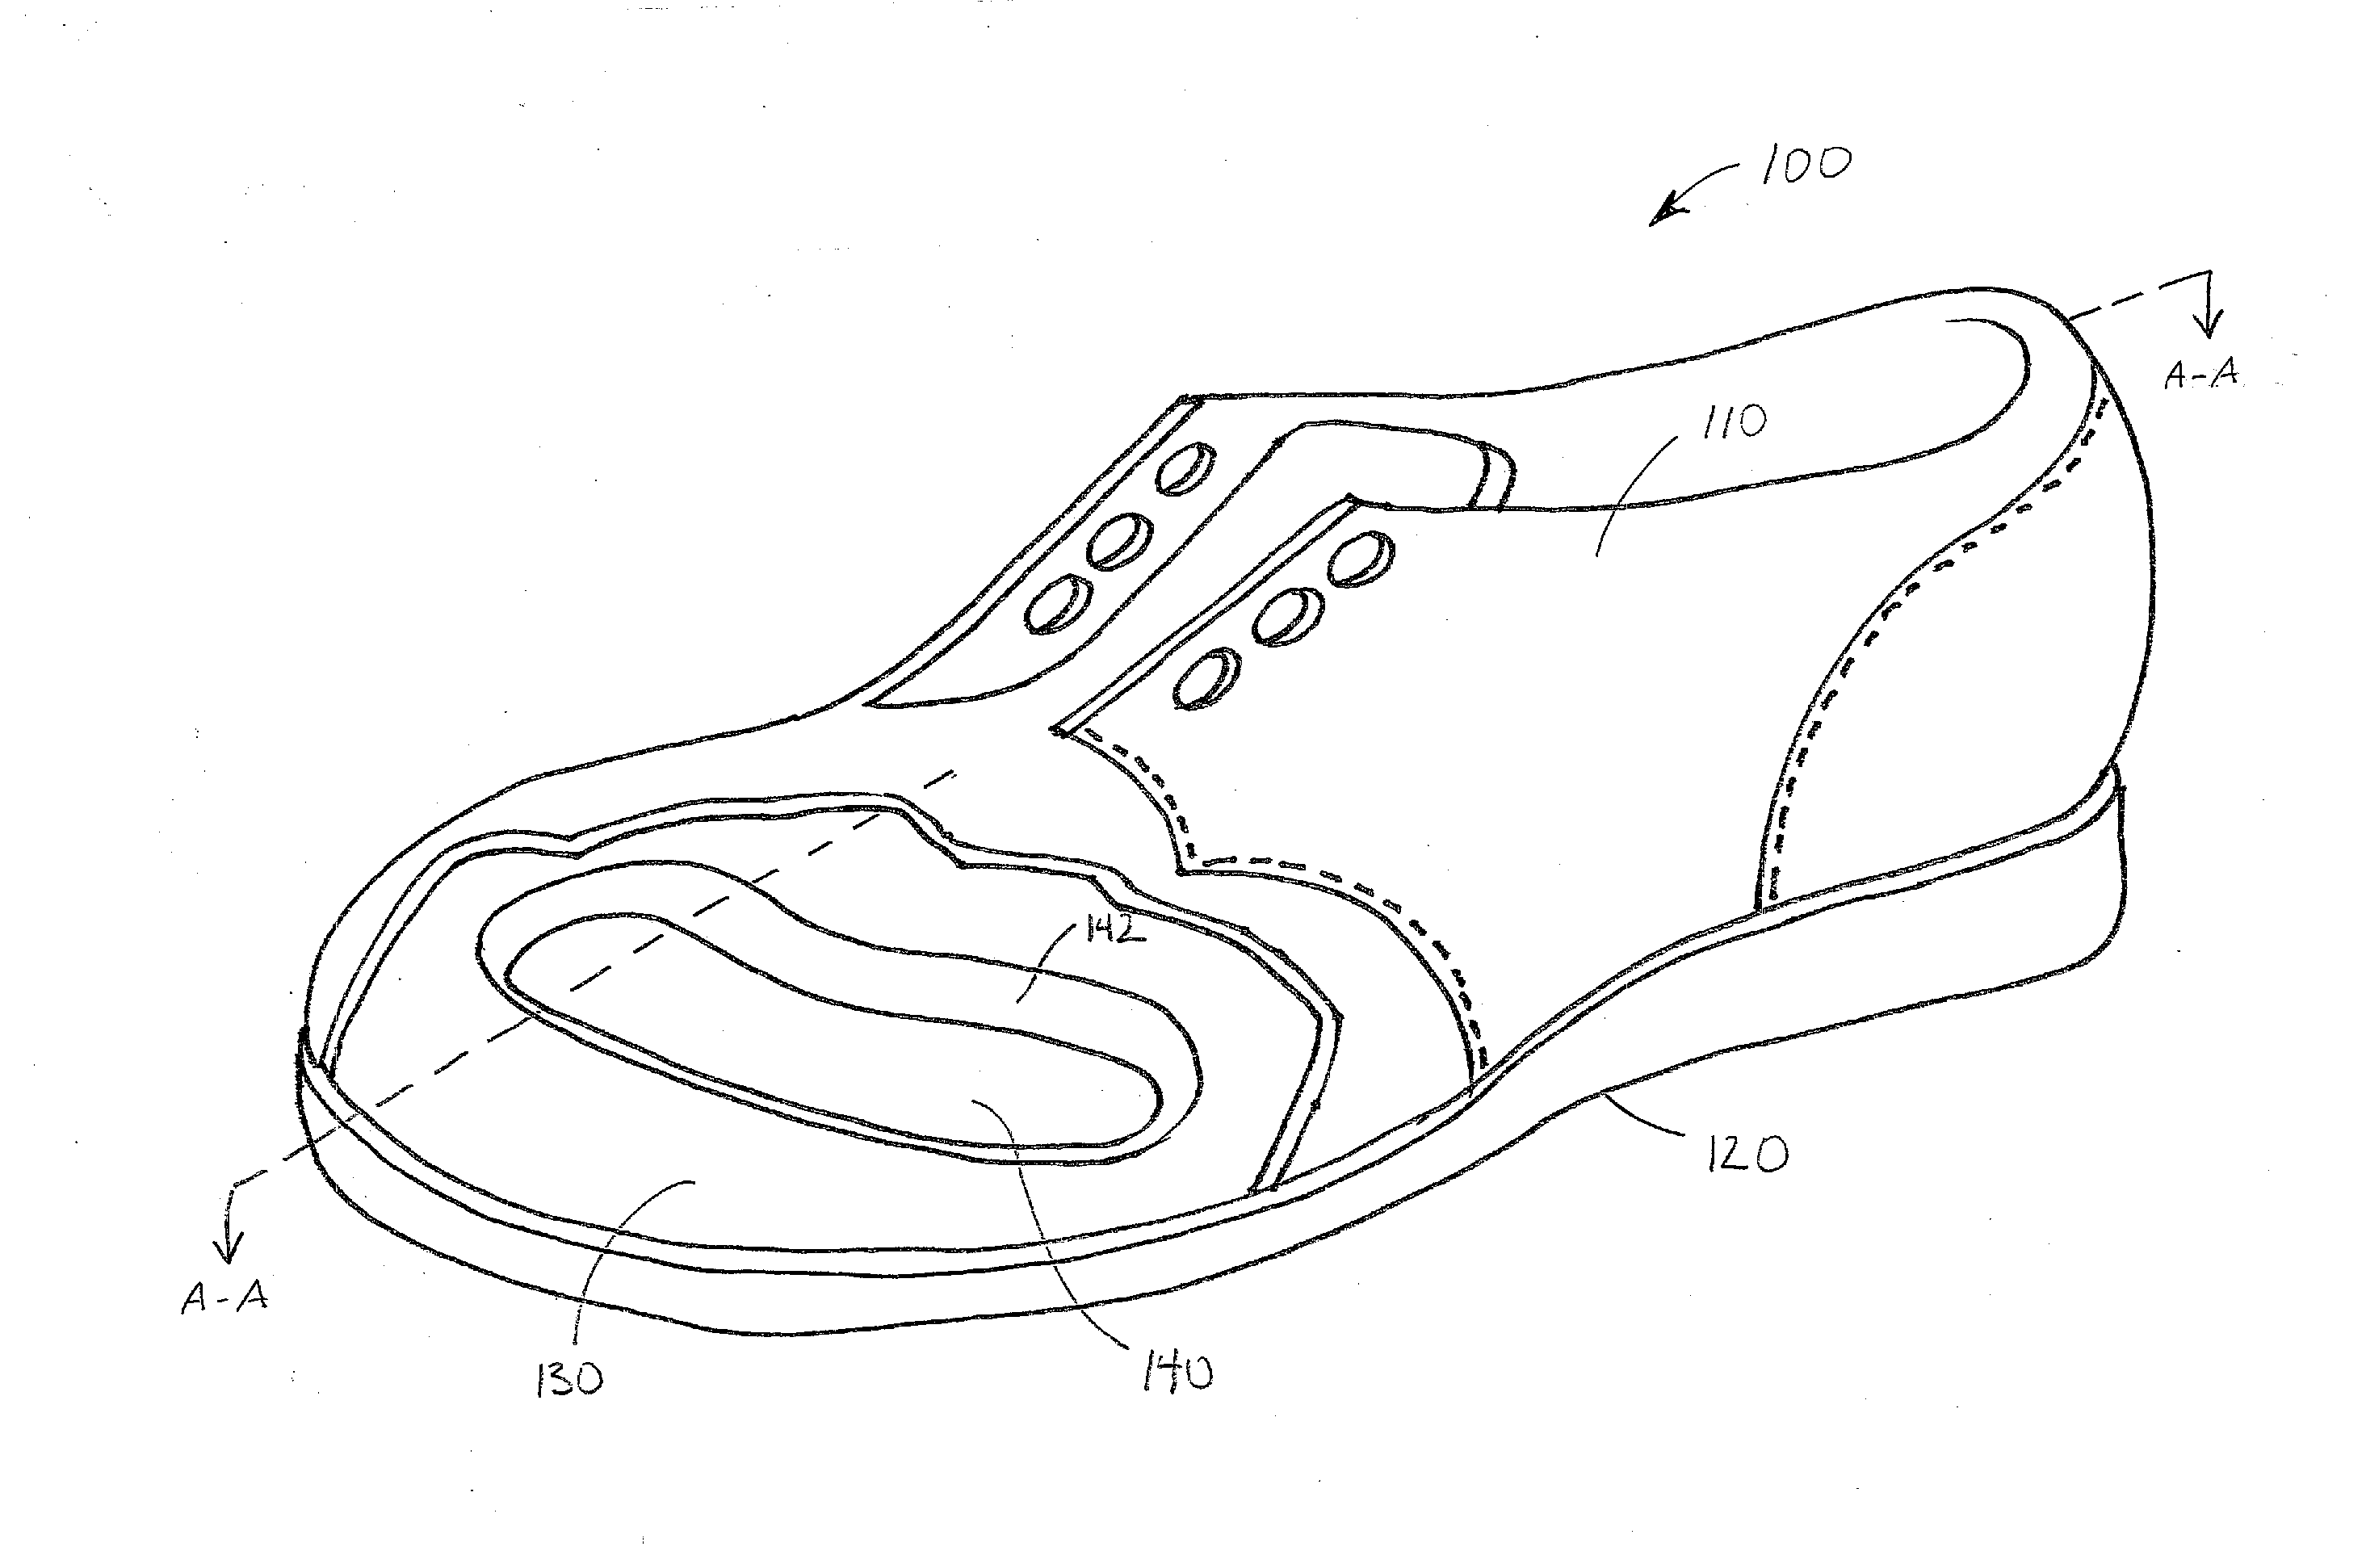 Shoe insole for metatarsal relief